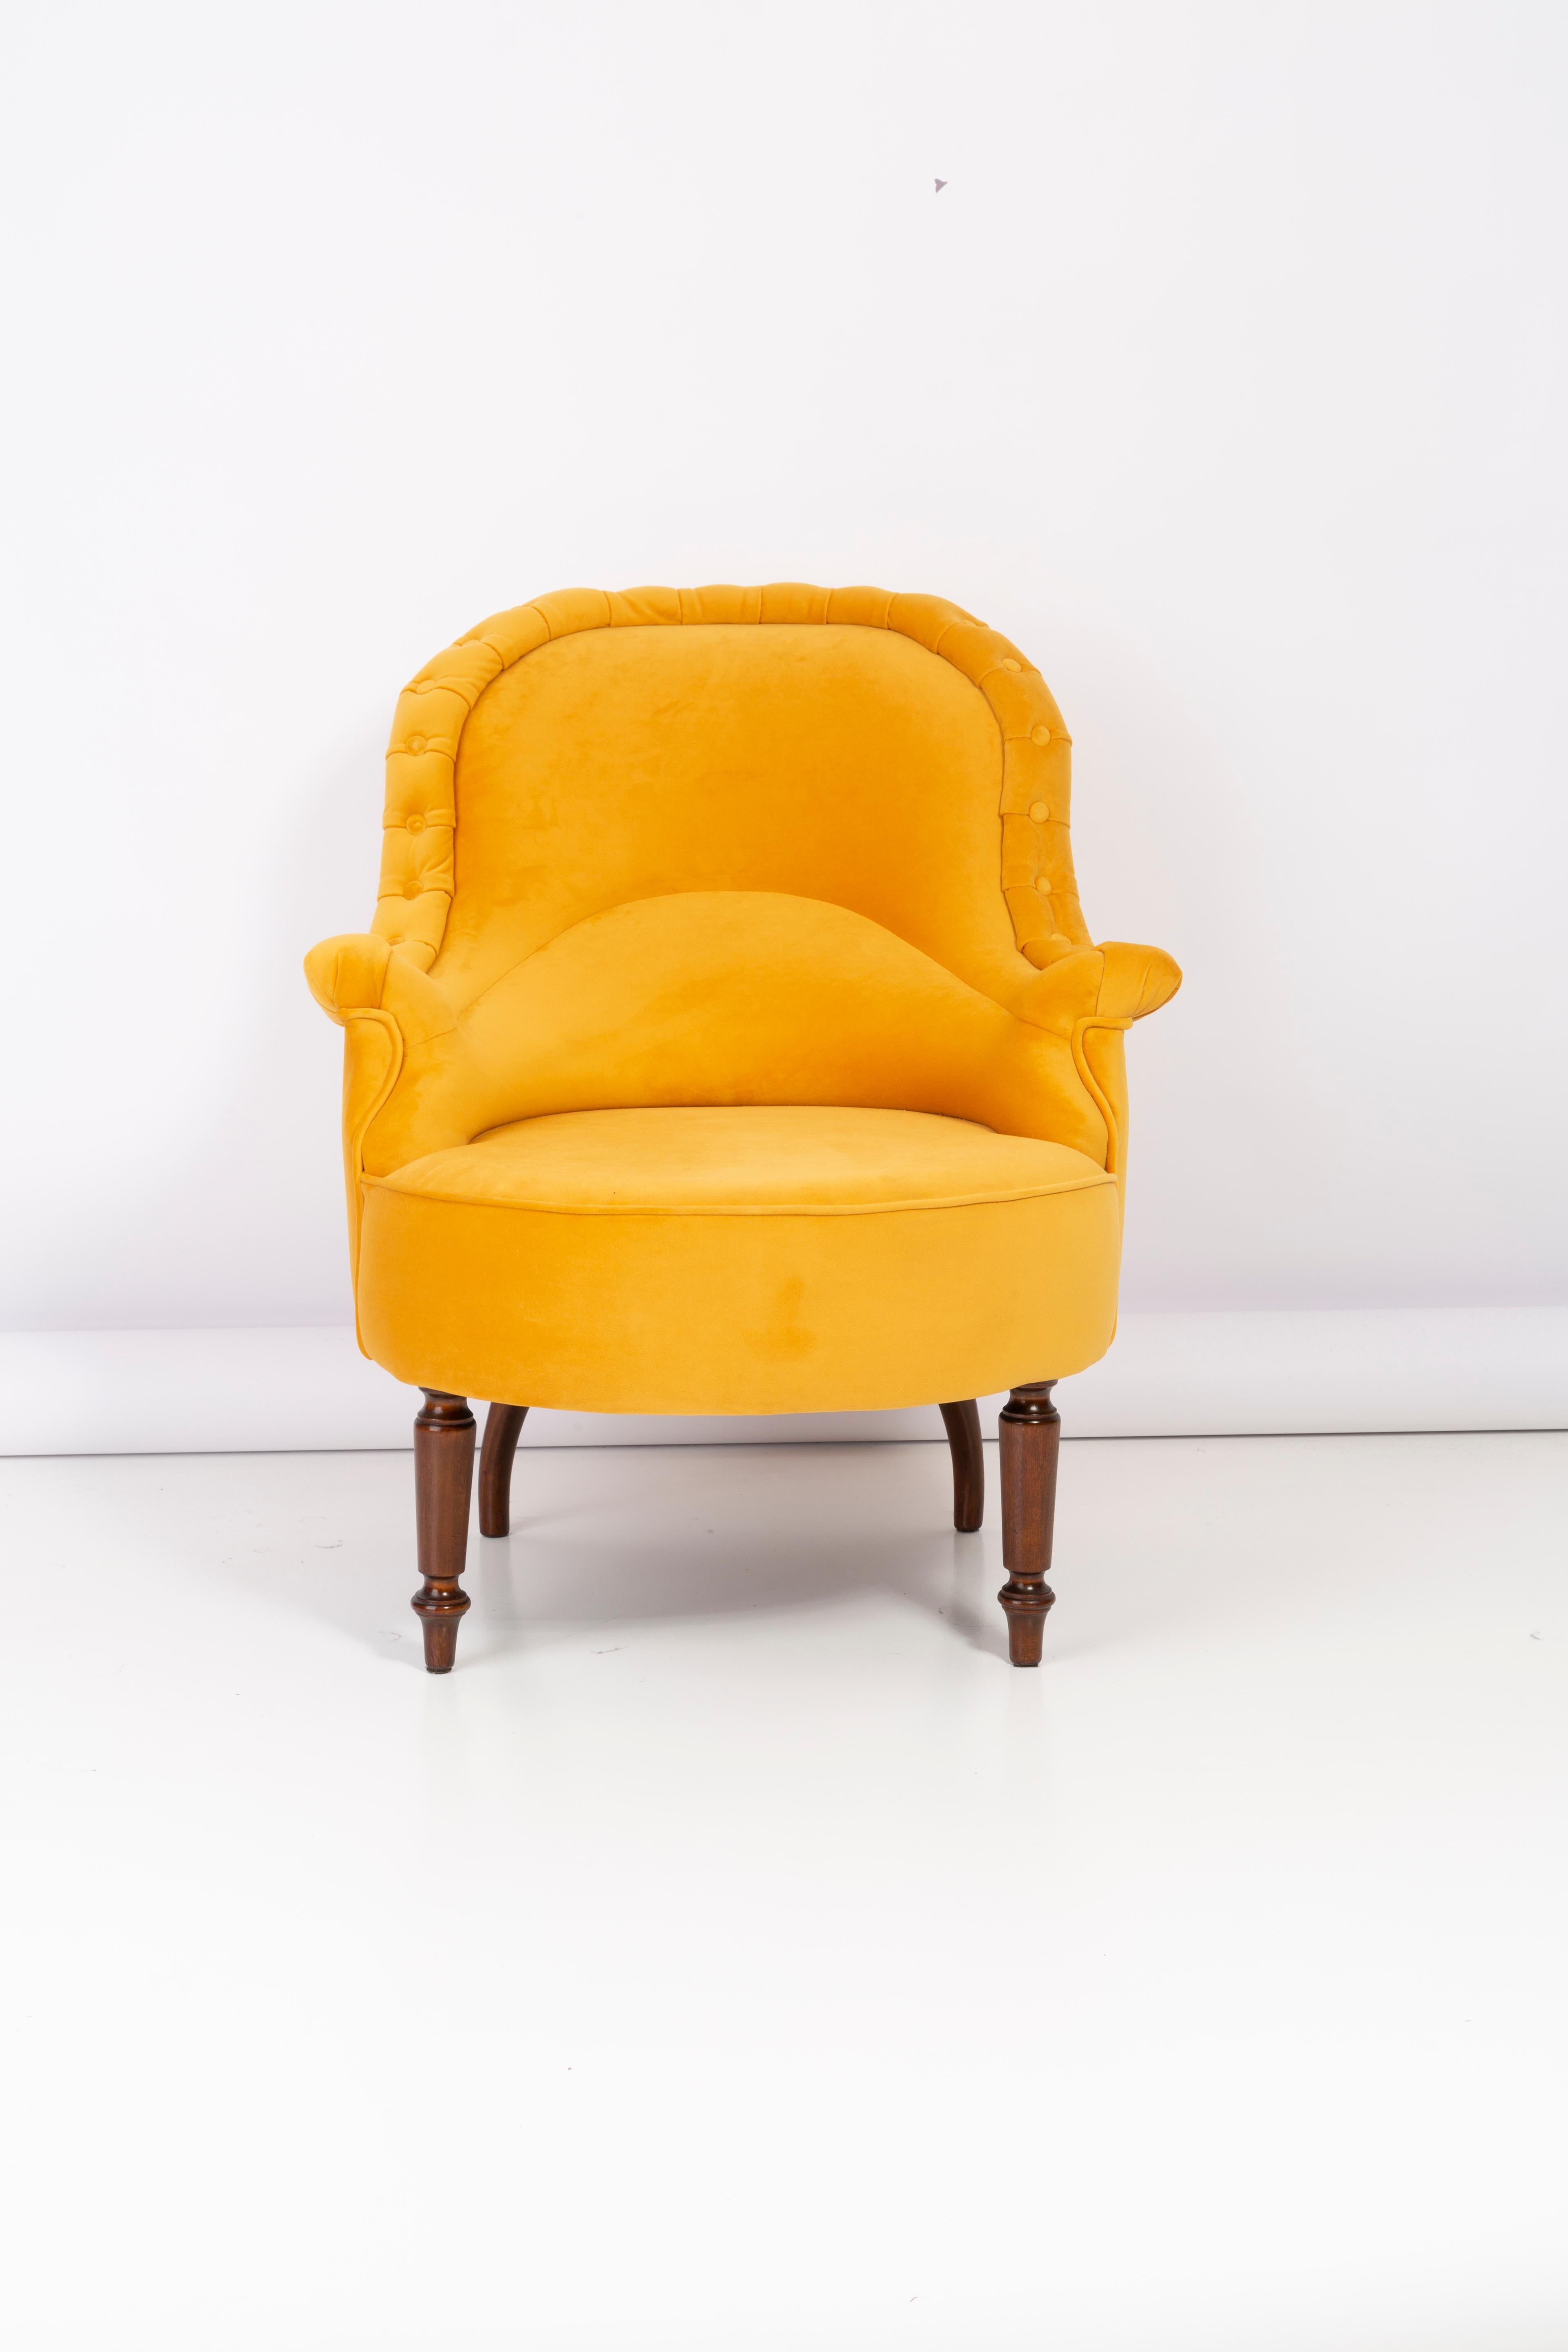 Pair of Unique Yellow Mustard Armchairs, 1930s, Germany For Sale 2